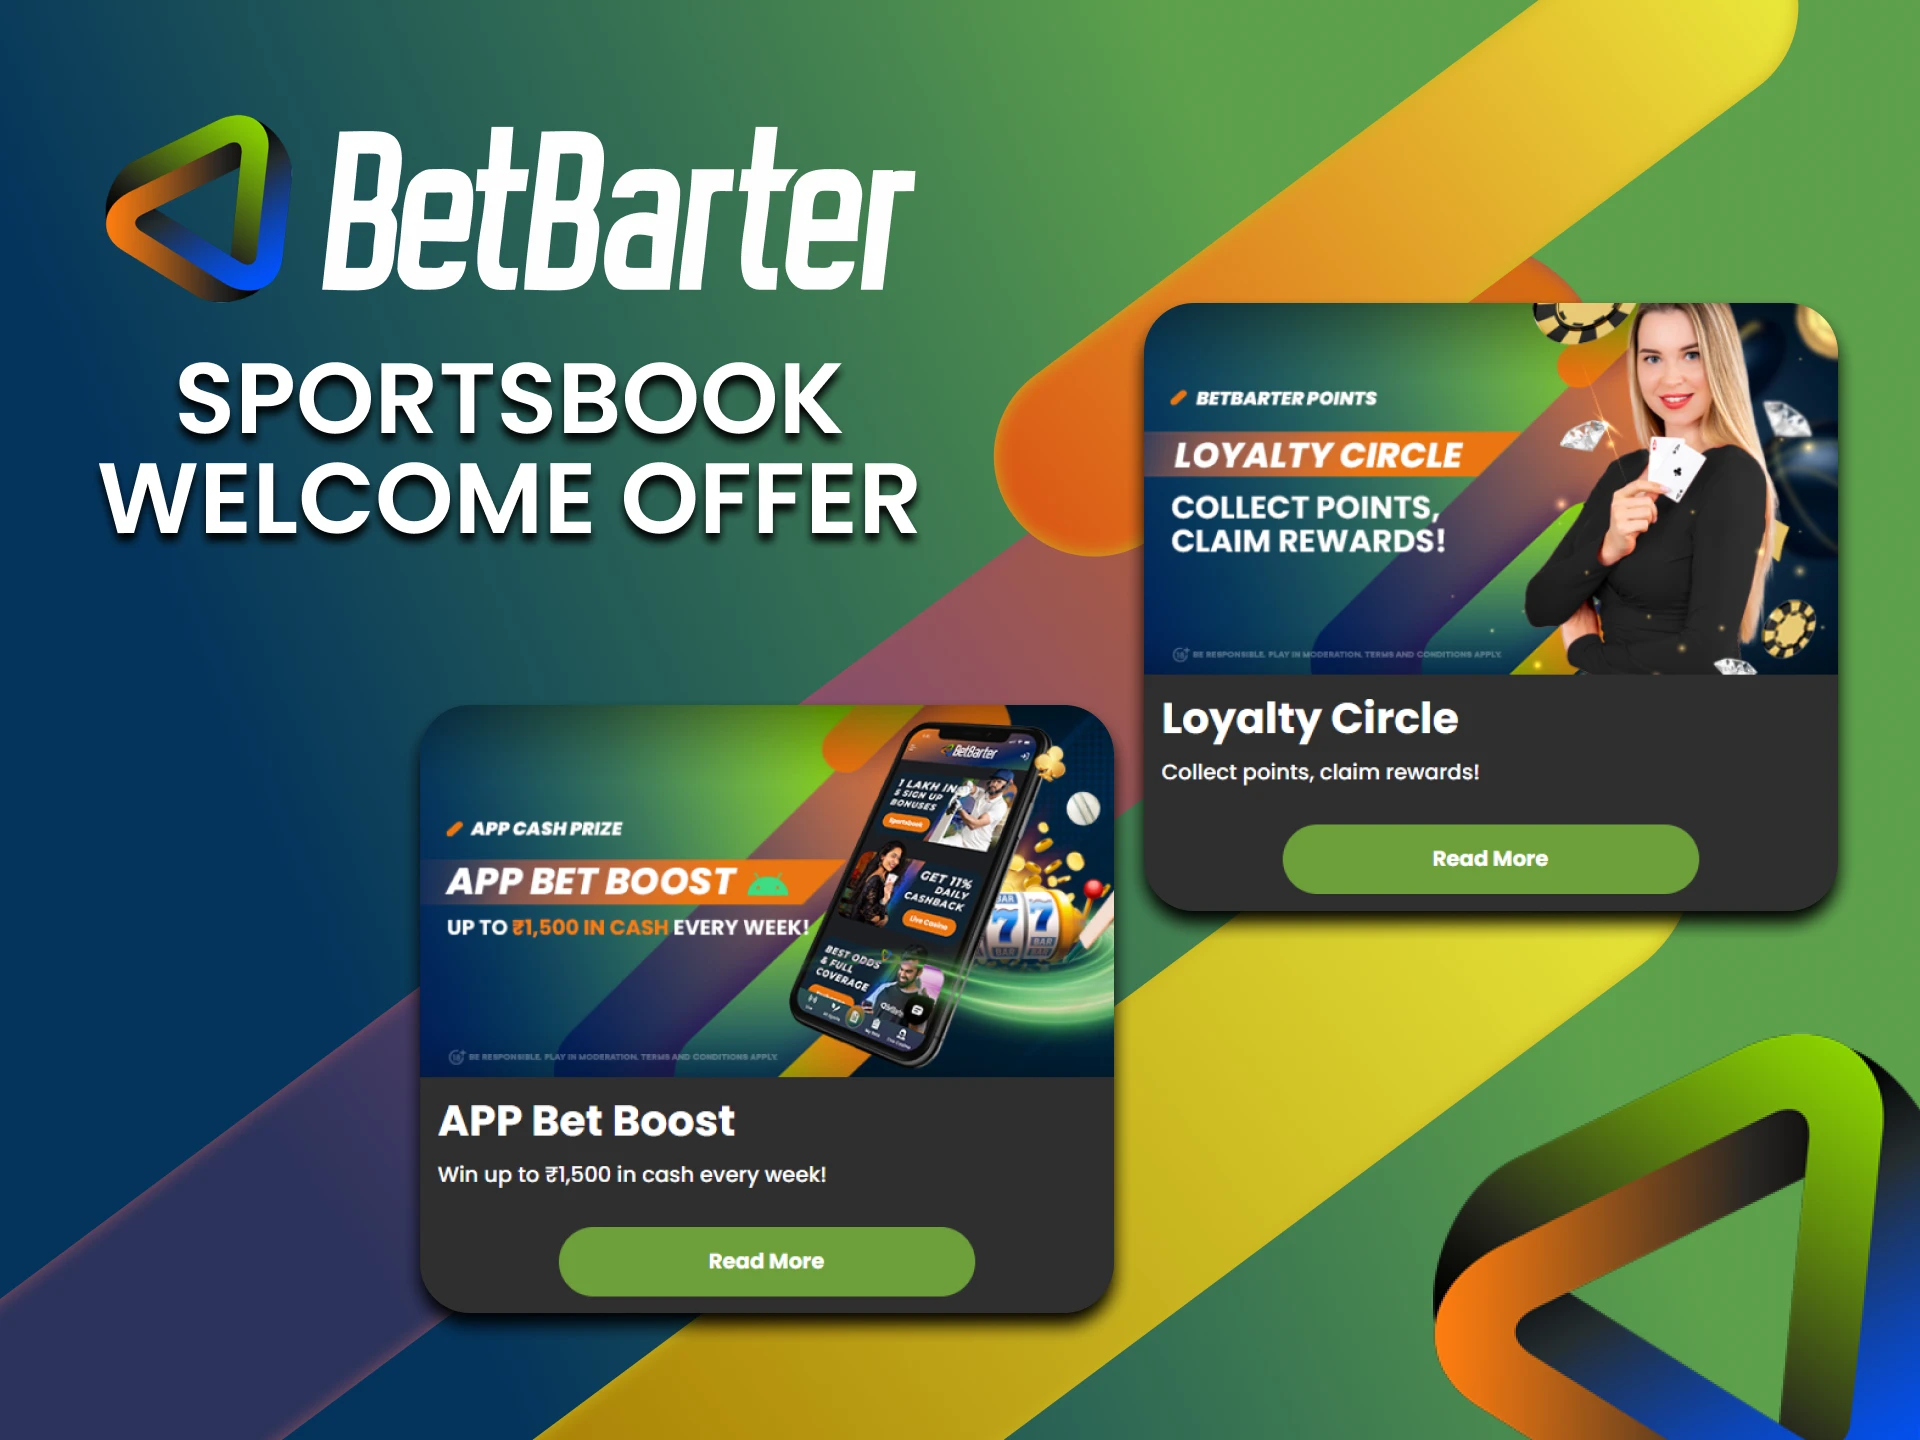 BetBarter is giving away a welcome bonus for sports betting.